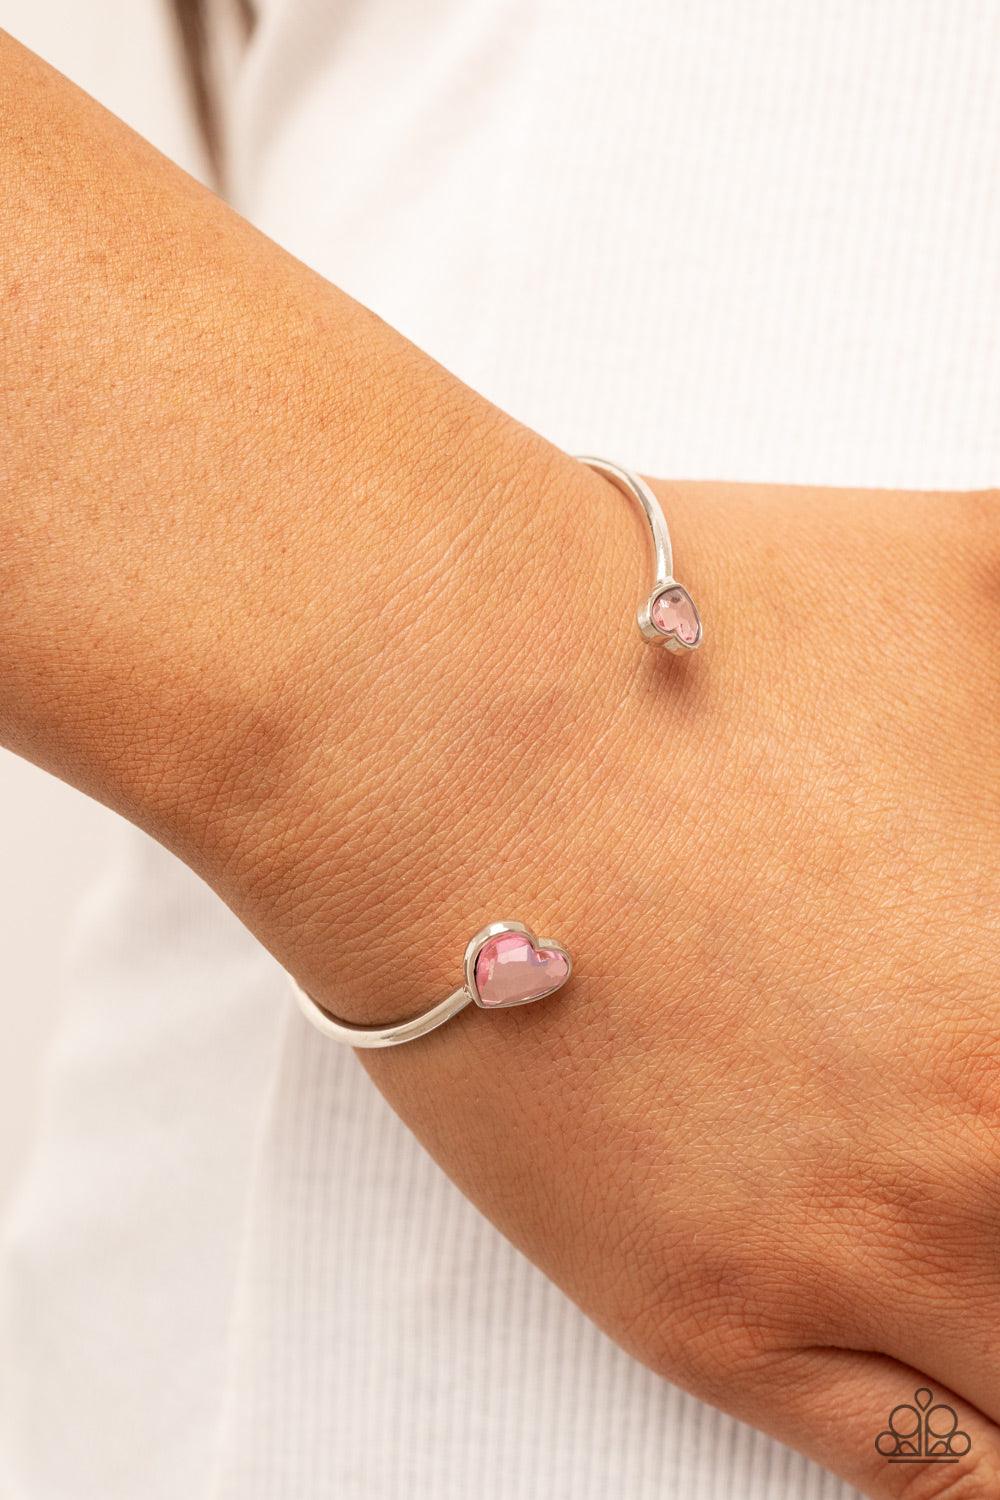 Paparazzi Accessories Unrequited Love - Pink Enhanced with glitzy pink rhinestones, two silver hearts adorn the ends of a silver band that curls around the wrist for a flirtatious open-faced style cuff. Sold as one individual bracelet. Bracelets